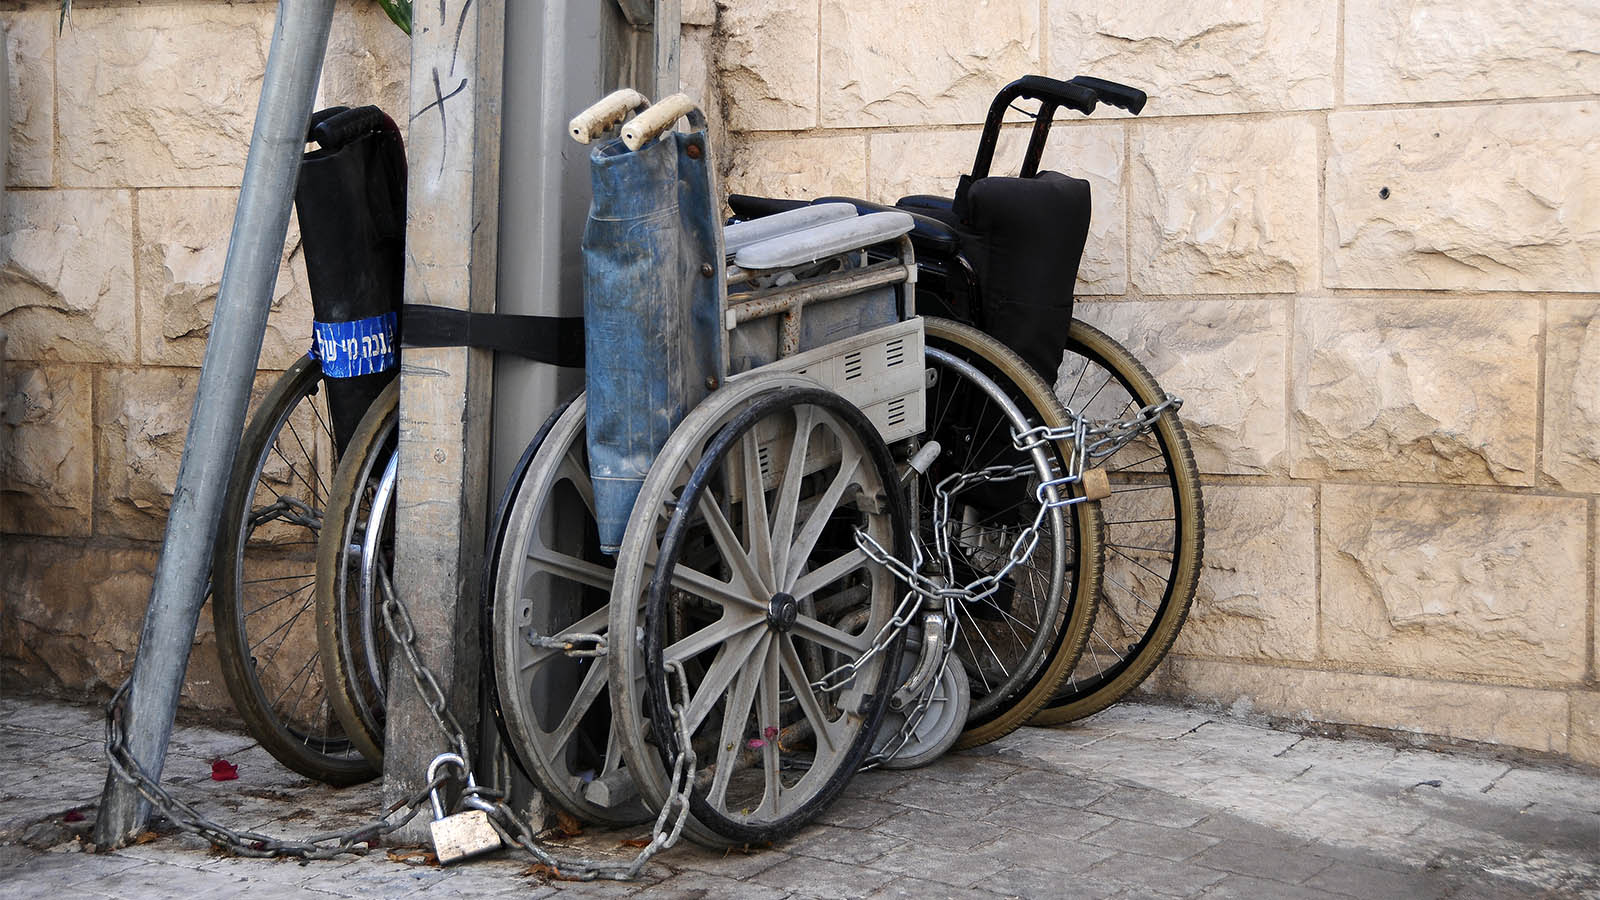 Wheelchairs locked outside of a house in Tel Aviv (Photograph: Shutterstock)